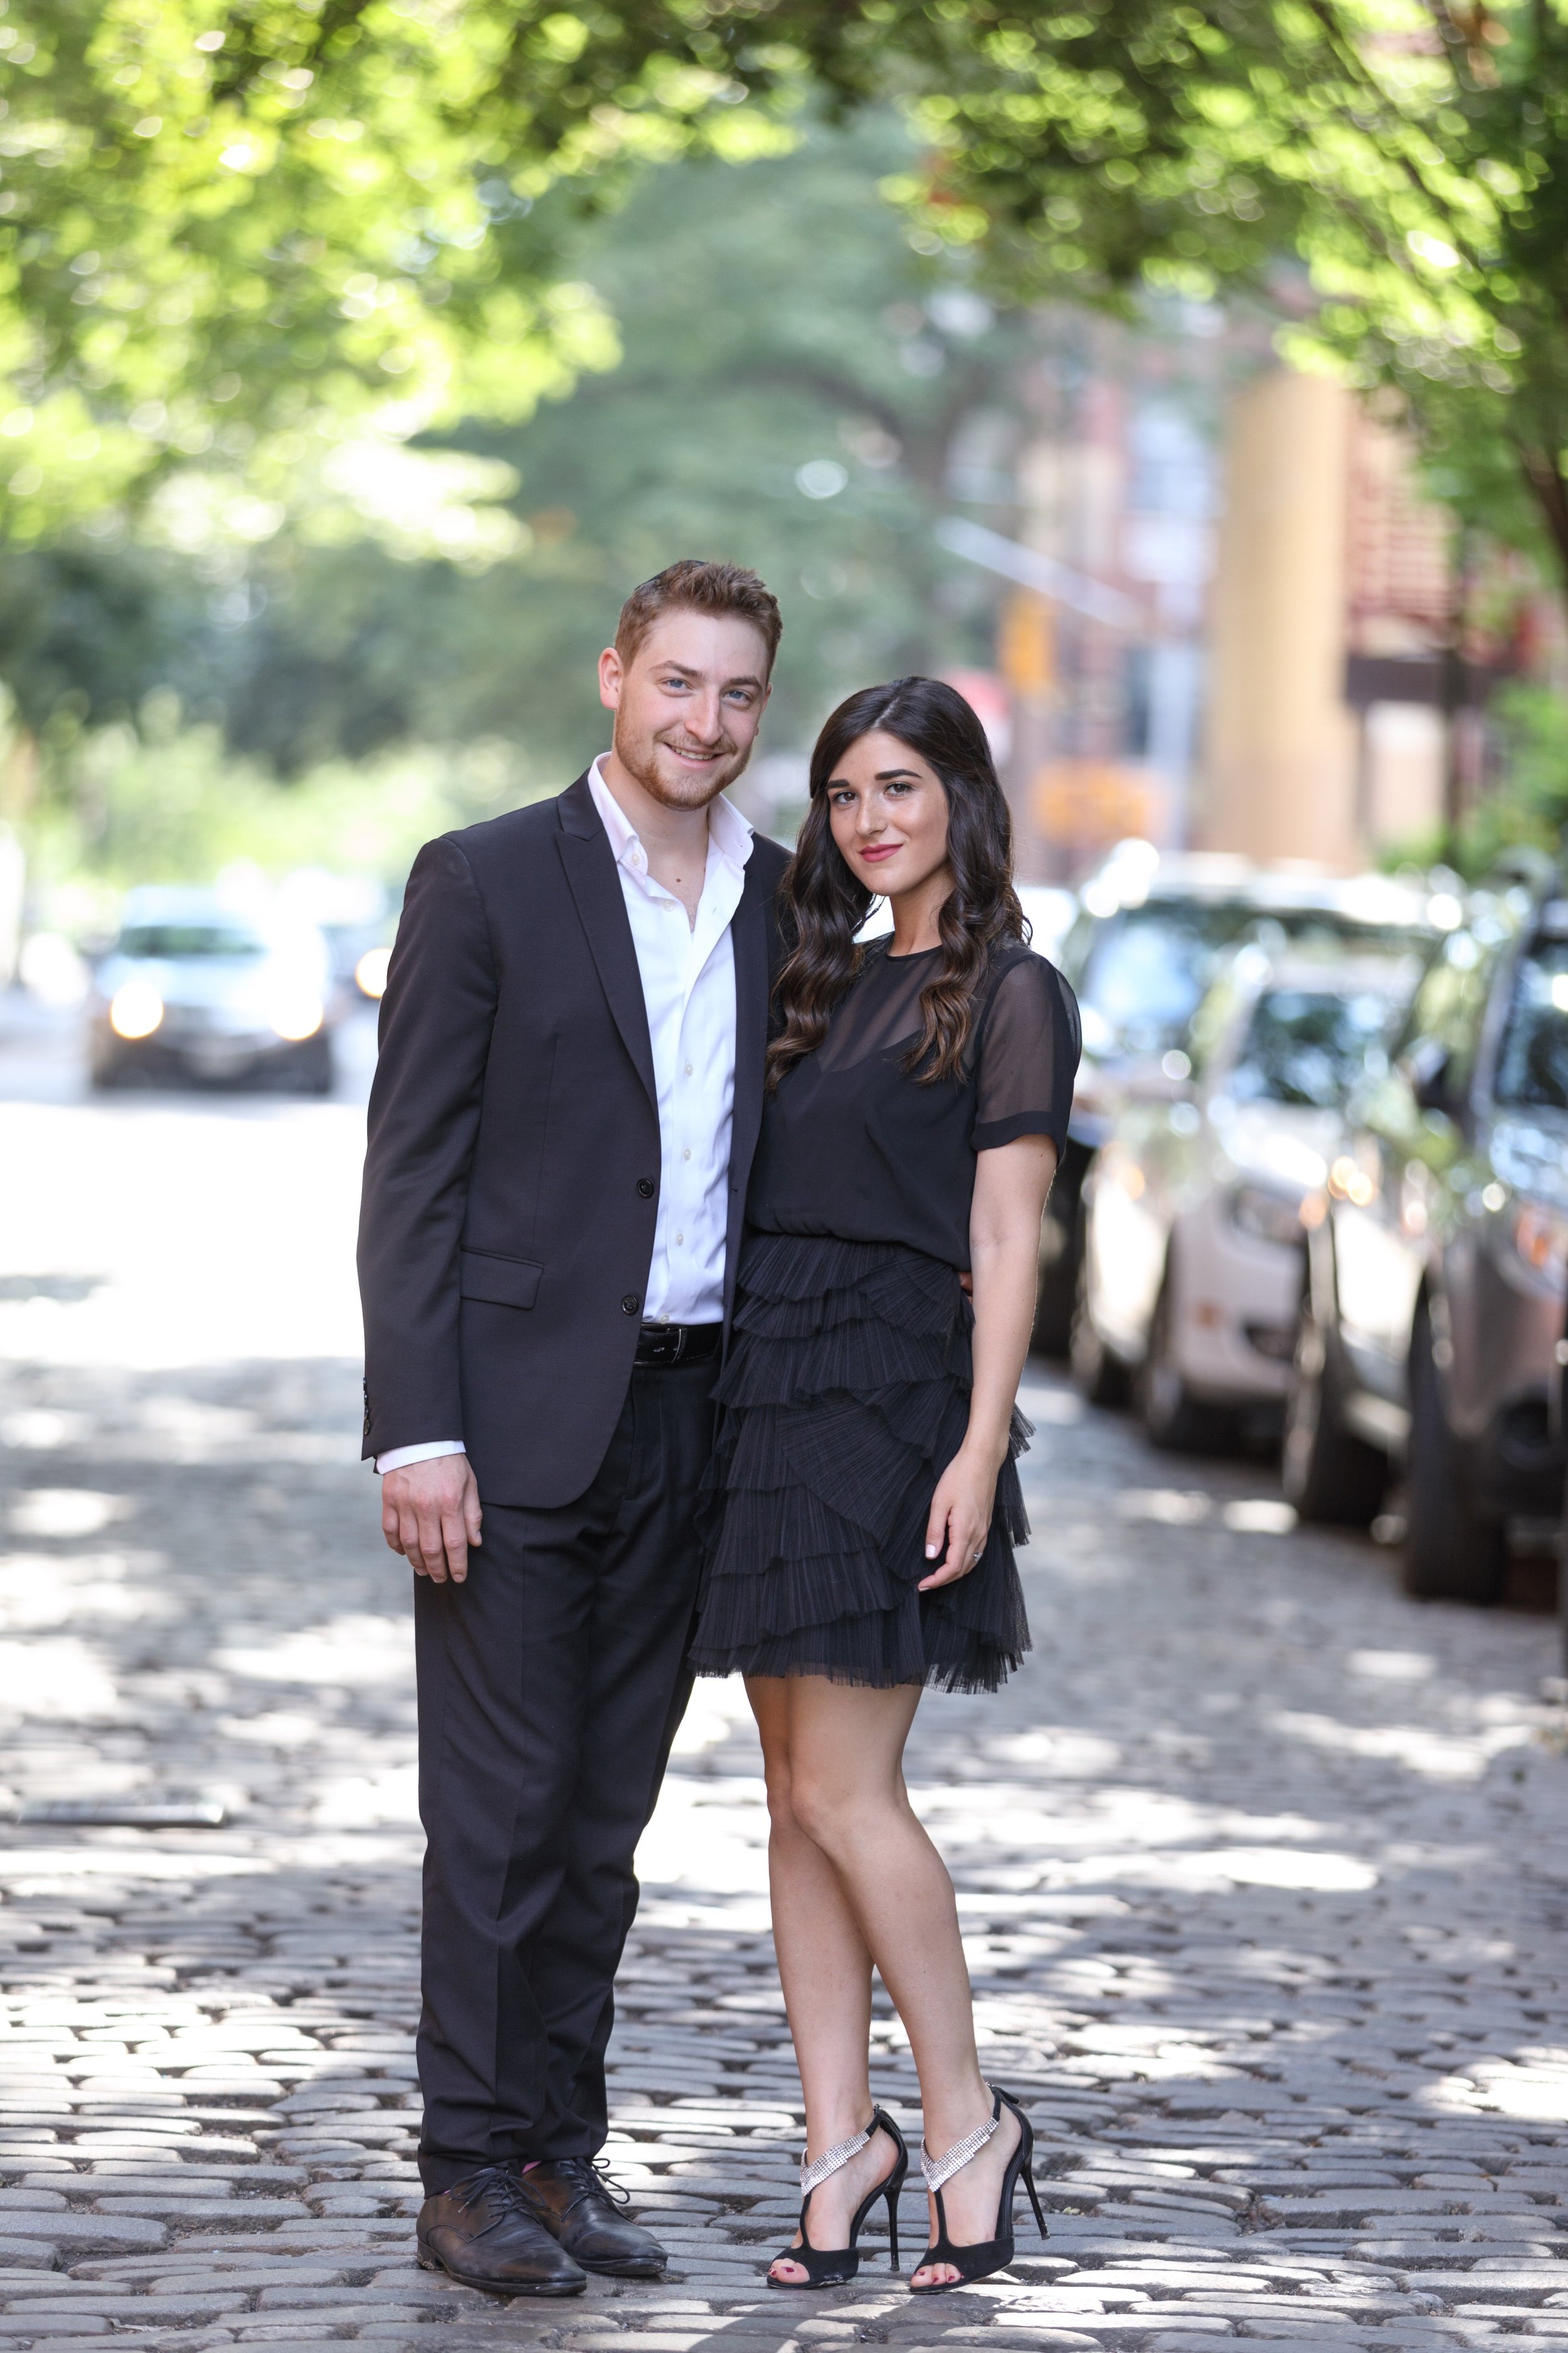 Why We Decided To Get Married On September 11 Esther Santer Fashion Blog NYC Street Style Blogger Outfits OOTD Trendy Engagement Shoot Photoshoot Lilian Haidar Photography Wedding Season Date Shoes Dress Suit Fancy Formal Happy Smile Heels Hair Girl.JPG